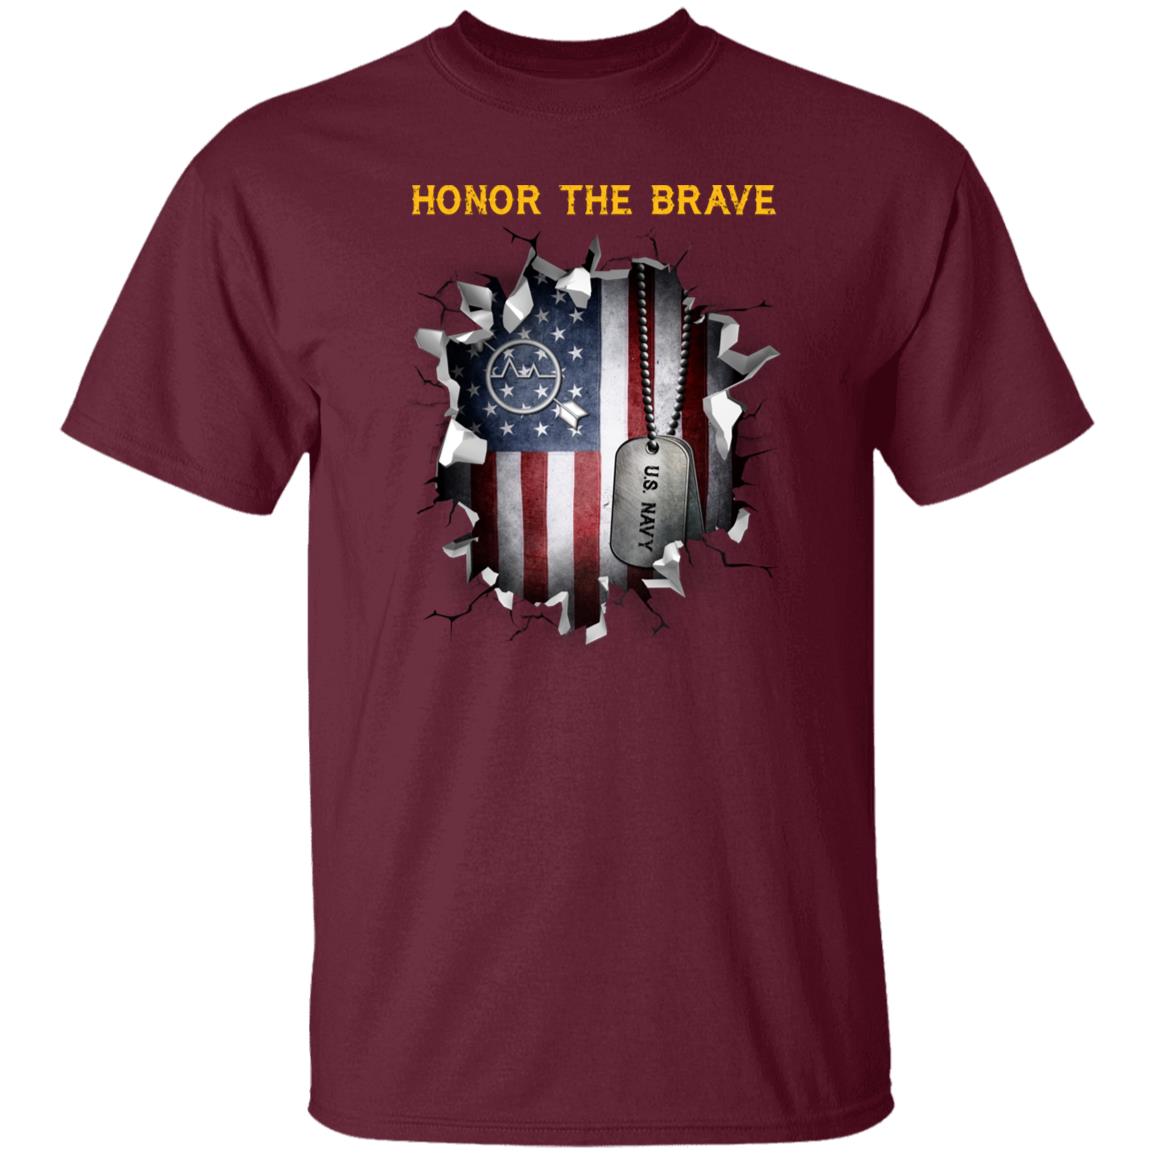 U.S Navy Operations specialist Navy OS - Honor The Brave Front Shirt